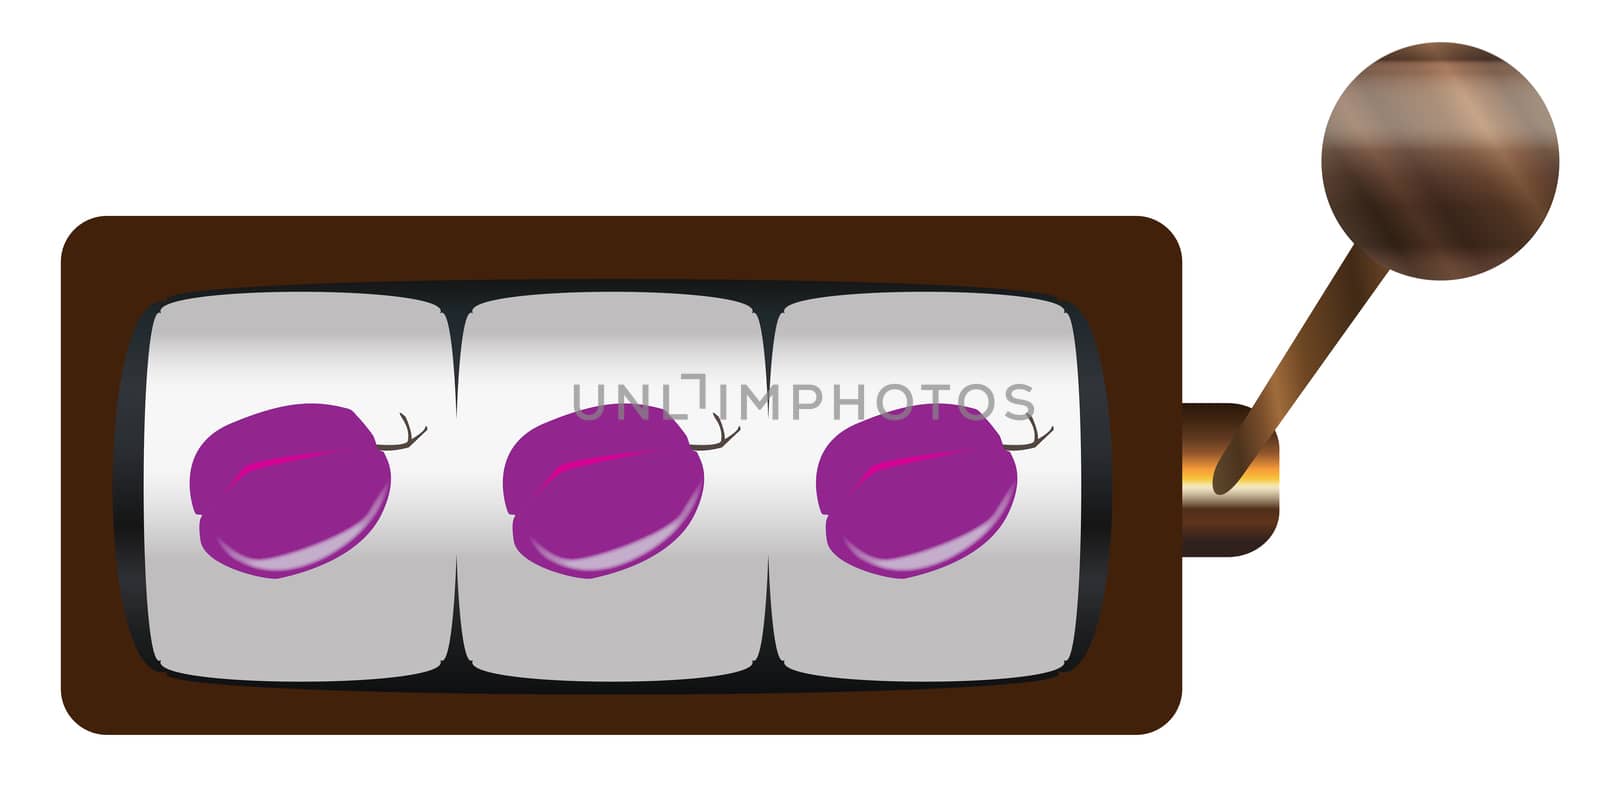 Fruit Machine 3 Plum Icons With Handle And Knob by Bigalbaloo